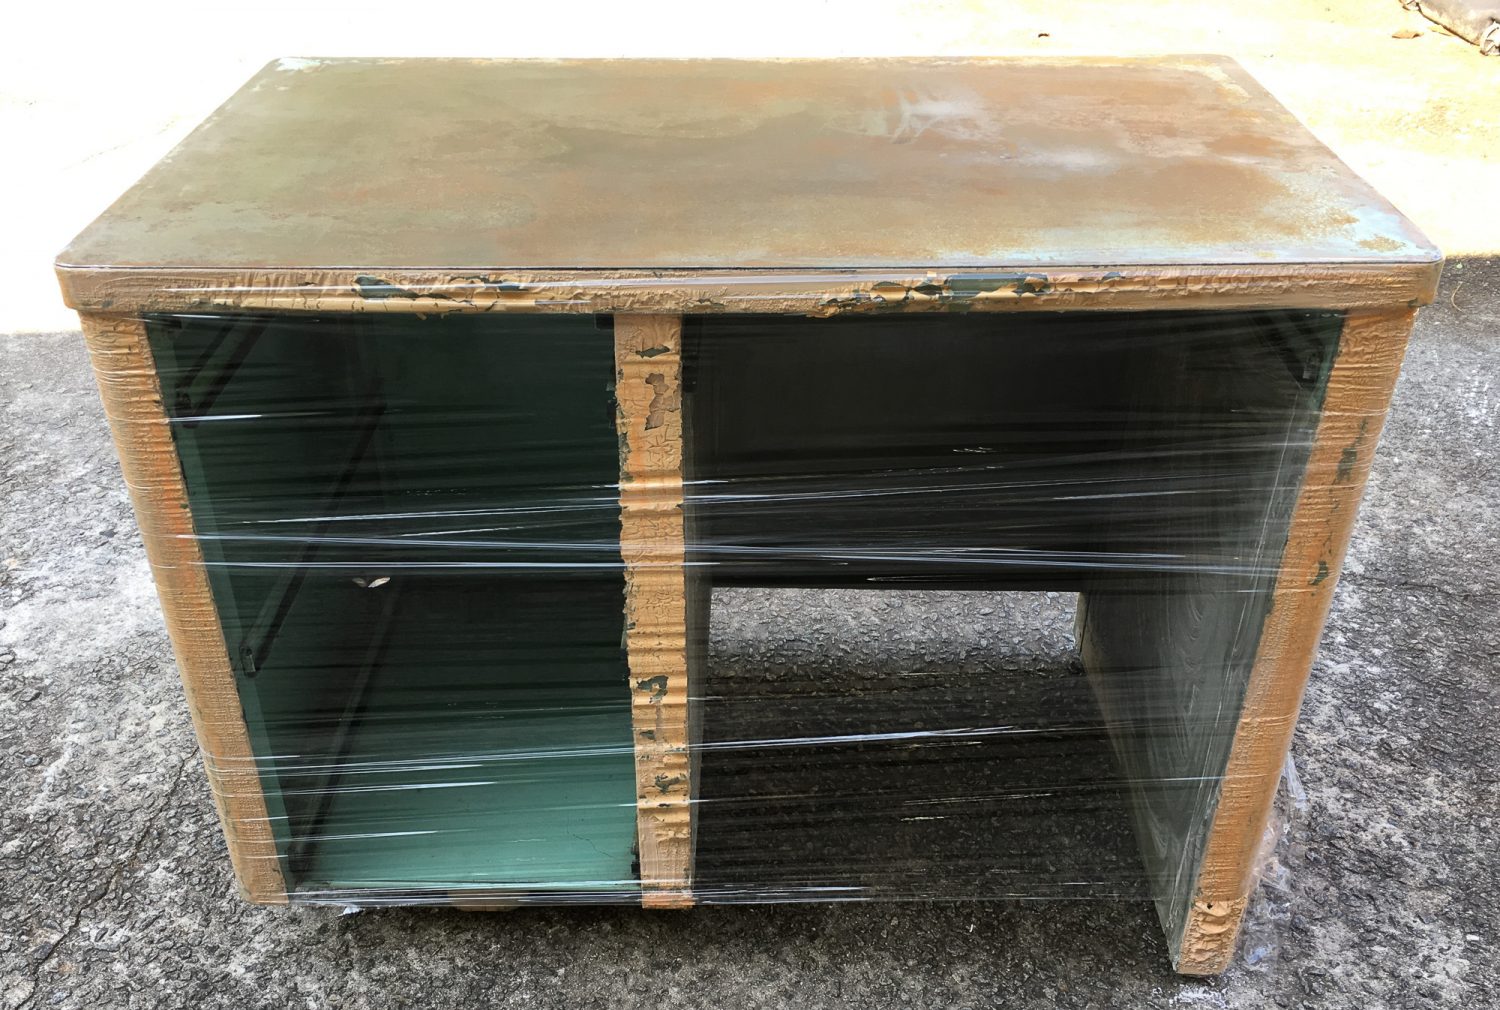 mid century steel tanker desk, paint stripping using Citristrip then covering with plastic wrap.